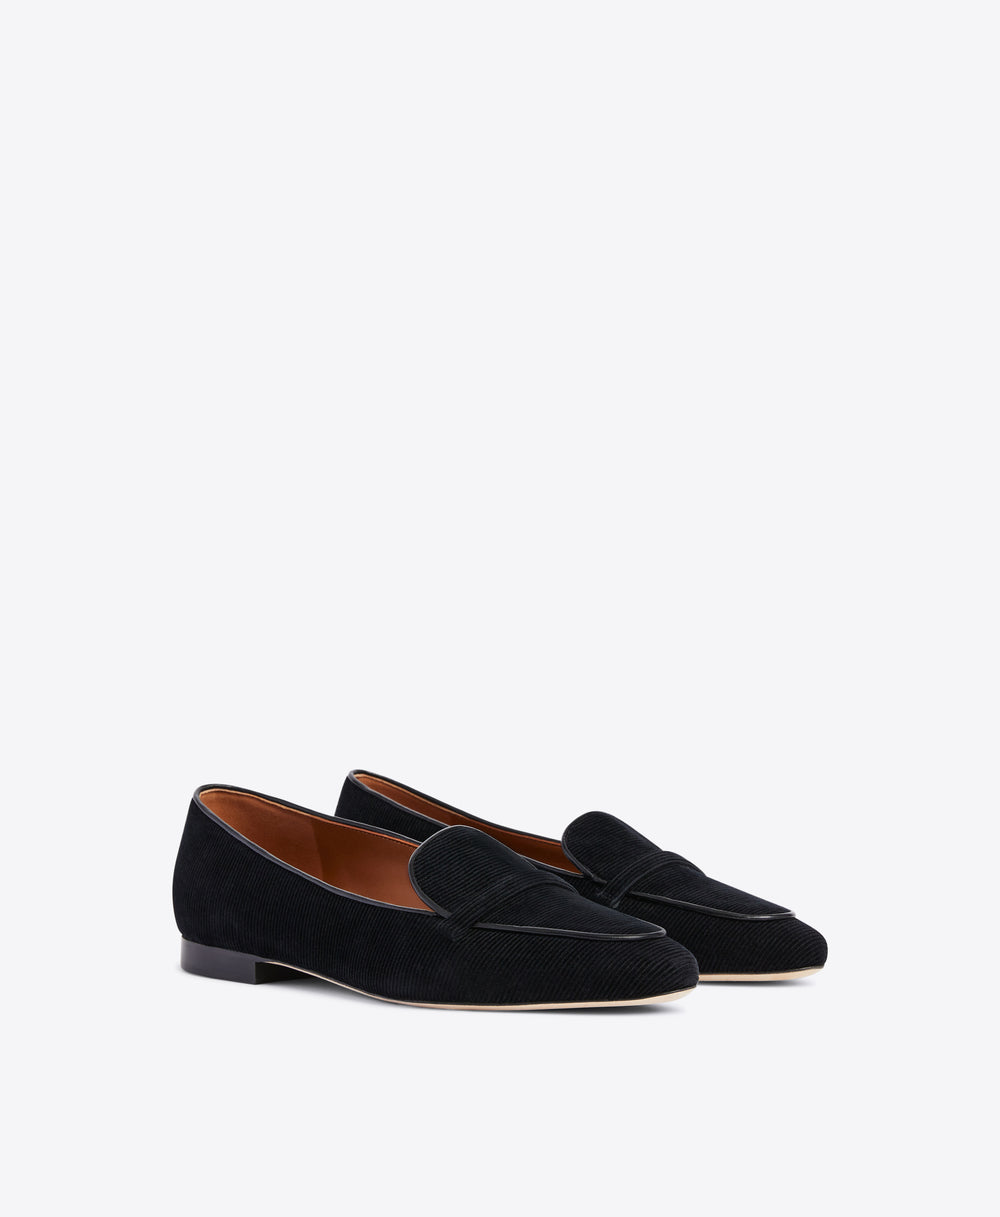 Black Velvet Corduroy Loafers - Elongated Almond Toe with Strap Detail on Monoblock | Malone Souliers